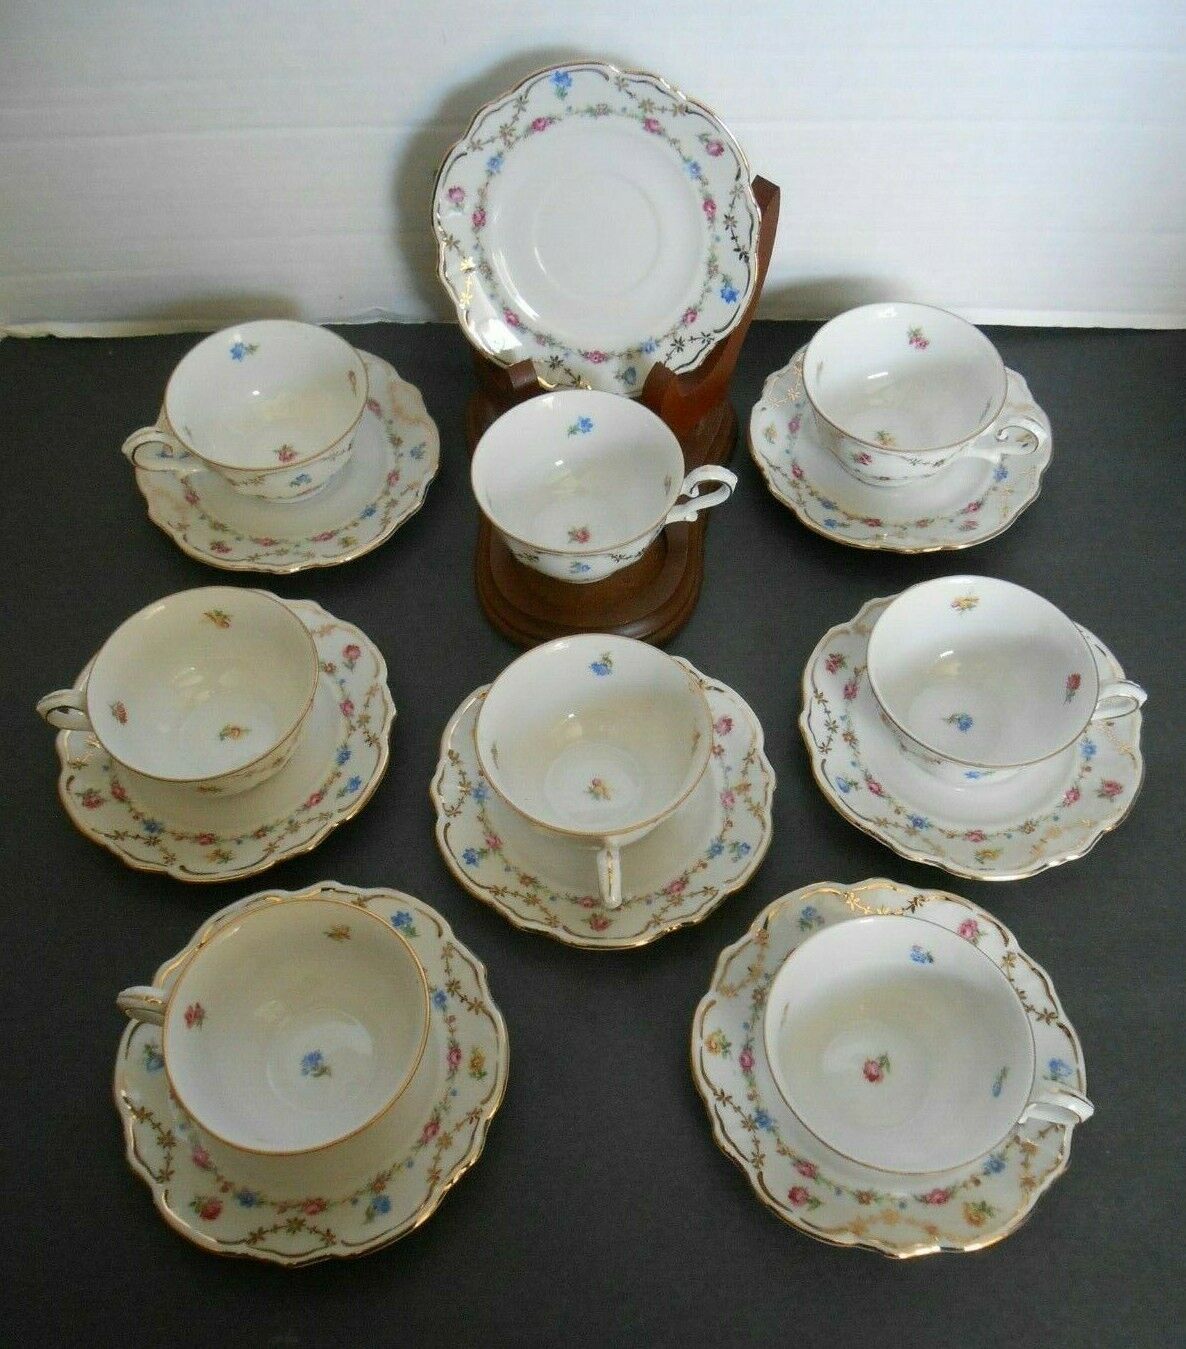 VINTAGE BAREUTHER US ZONE DEMITASSE CUPS & SAUCERS